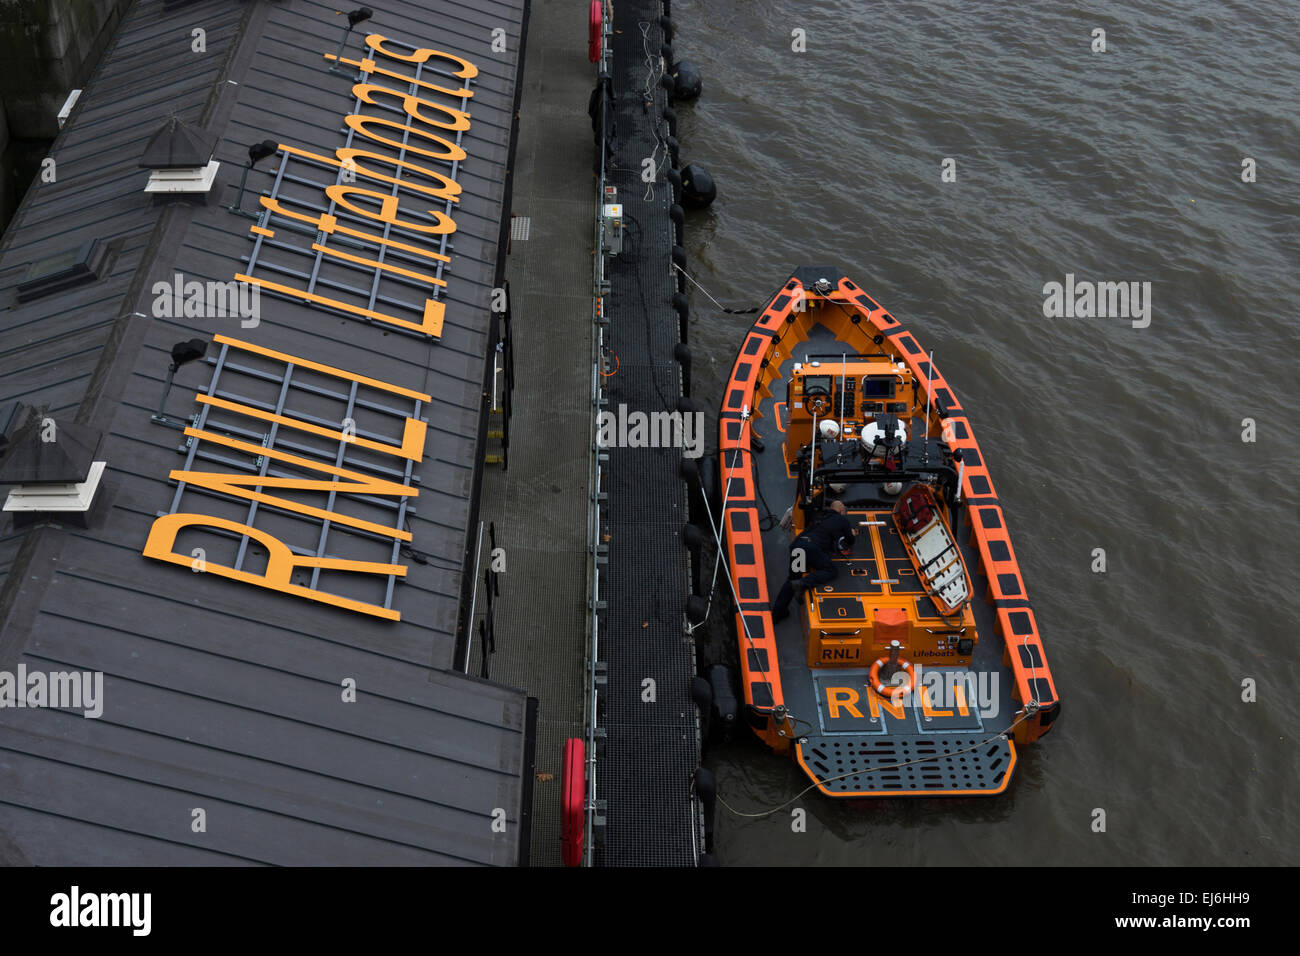 A new RNLI Lifeboat moored up, in the river Thames why a crew member works on getting it ship ready. Stock Photo